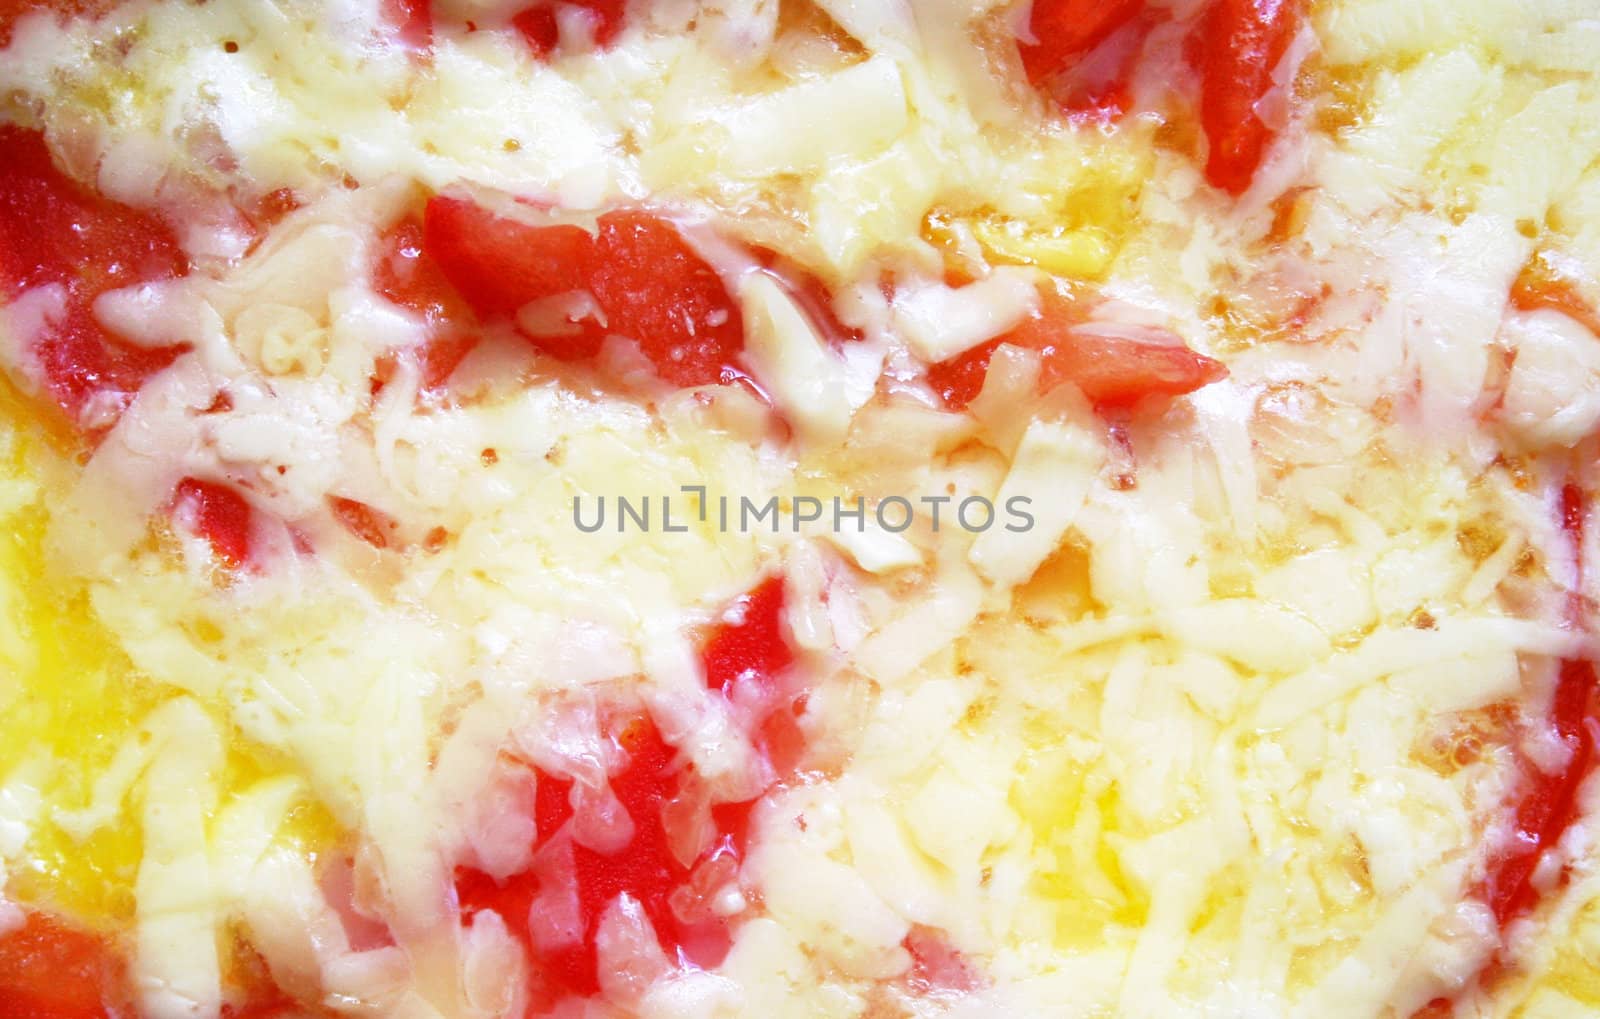 Omelette with tomatoes and cheese can use as background